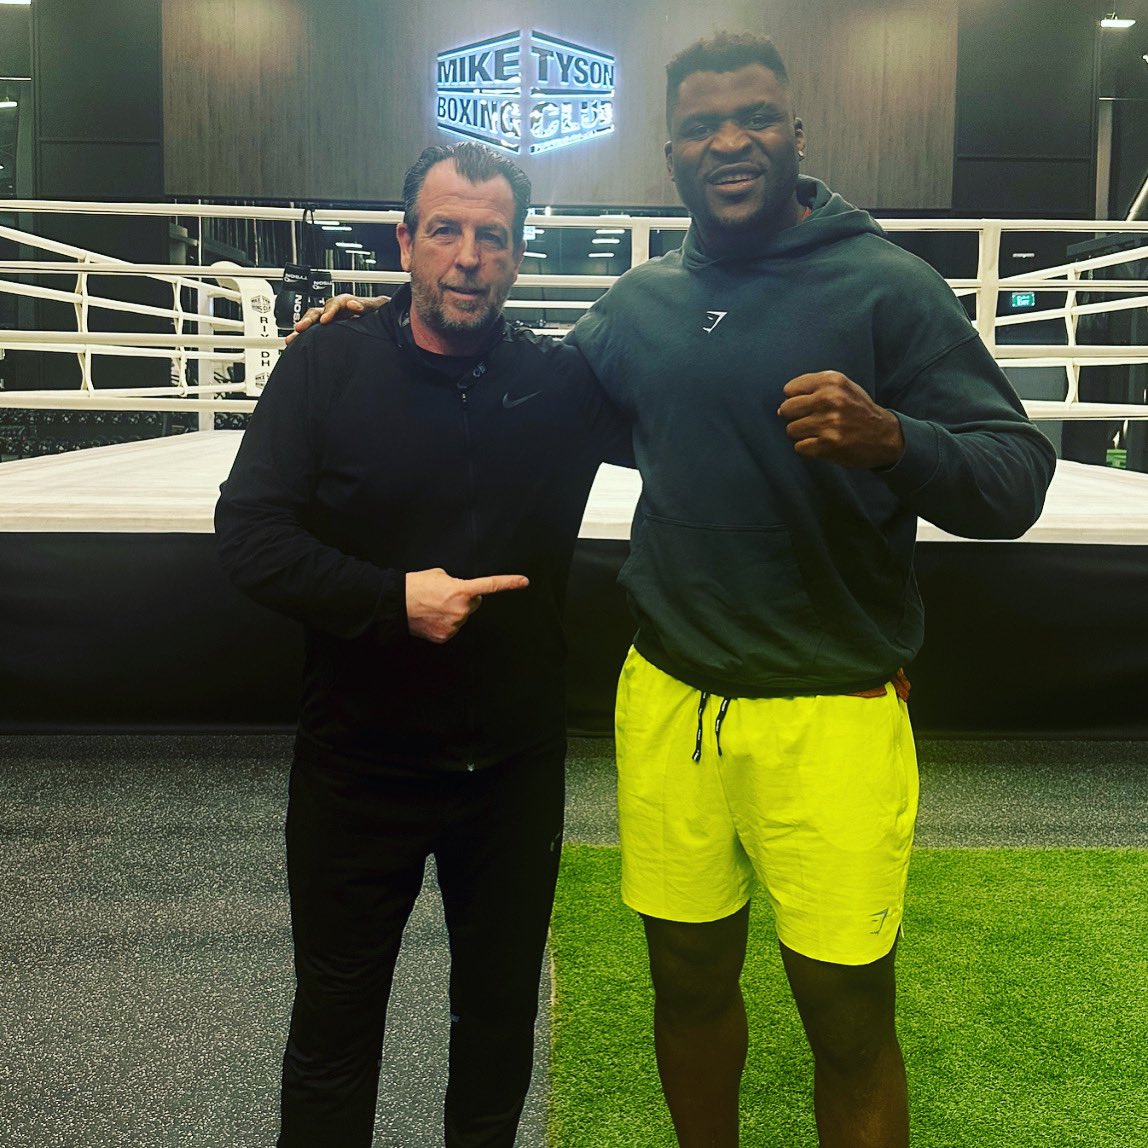 Good to see @francis_ngannou in @MikeTyson gym today here in Riyadh . #Boxing #Ngannou